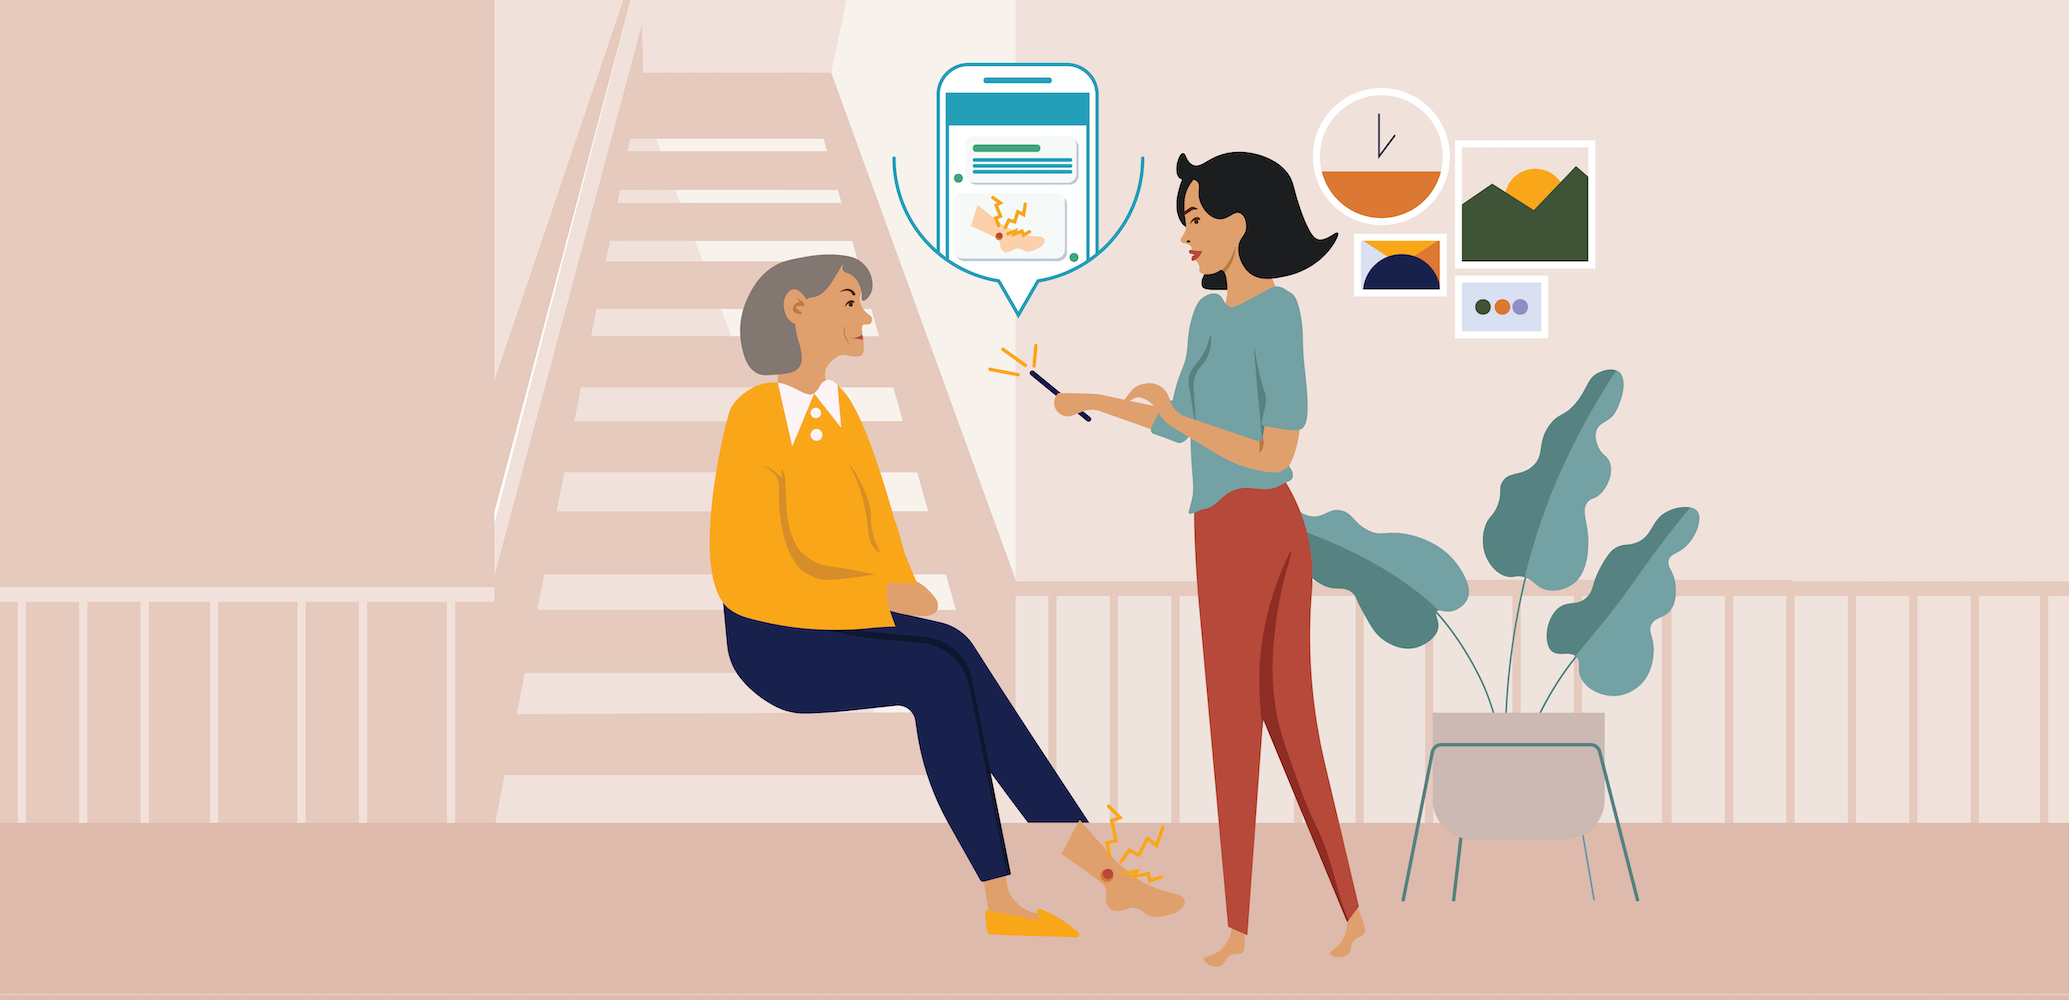 Illustration of two people discussing a healthcare mobile app